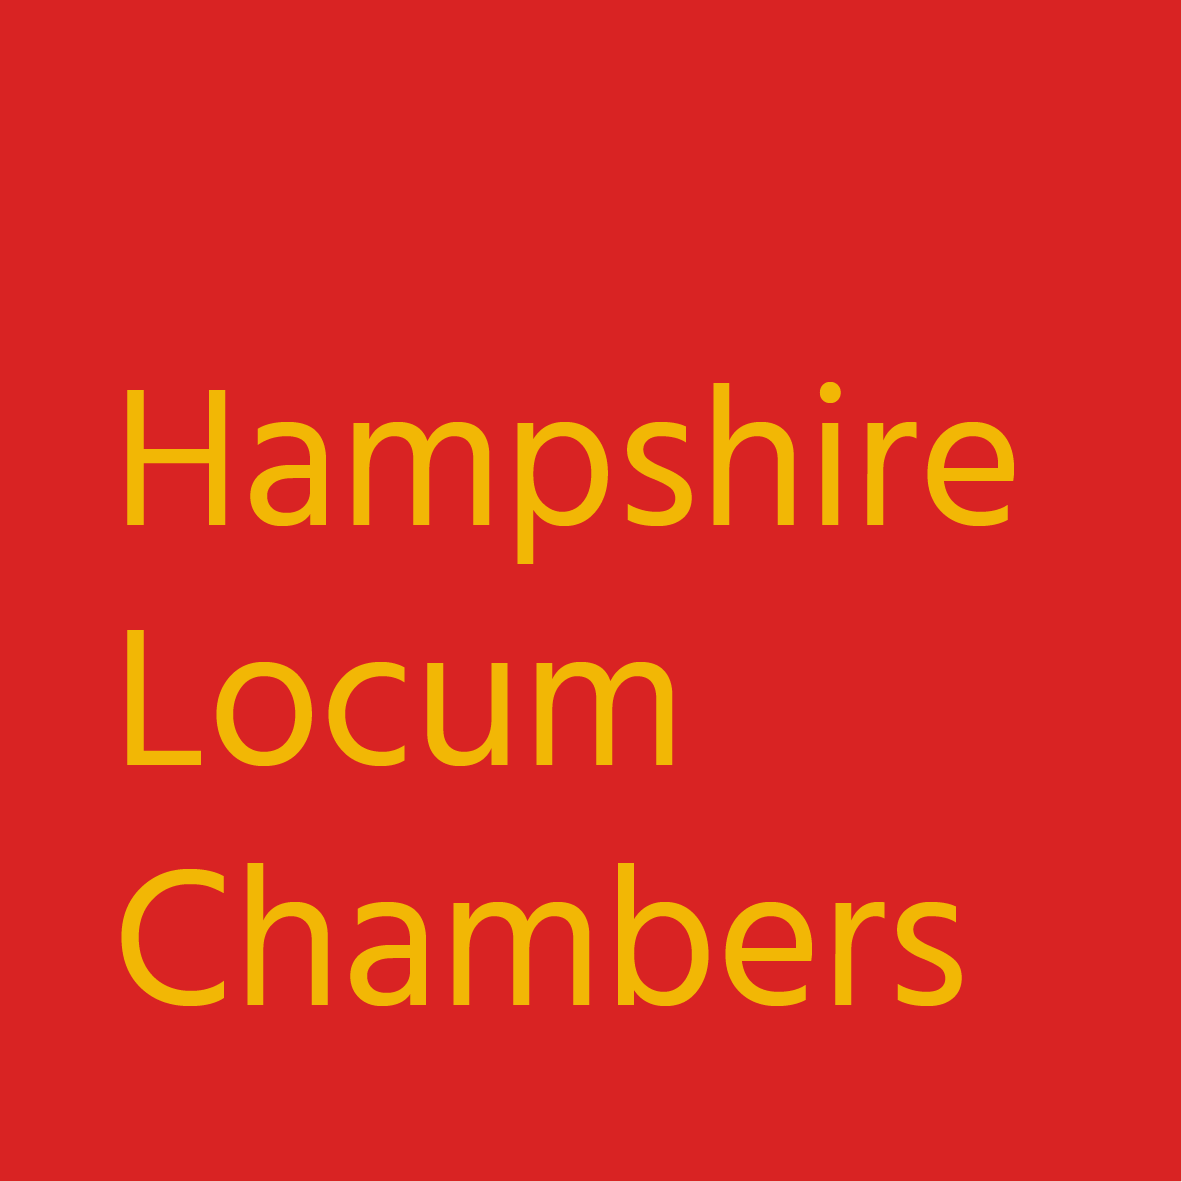 Join our fully-funded NASGP Locum Chambers in Hampshire when you sign up to our partnership to work in Portsmouth, Southampton and beyond